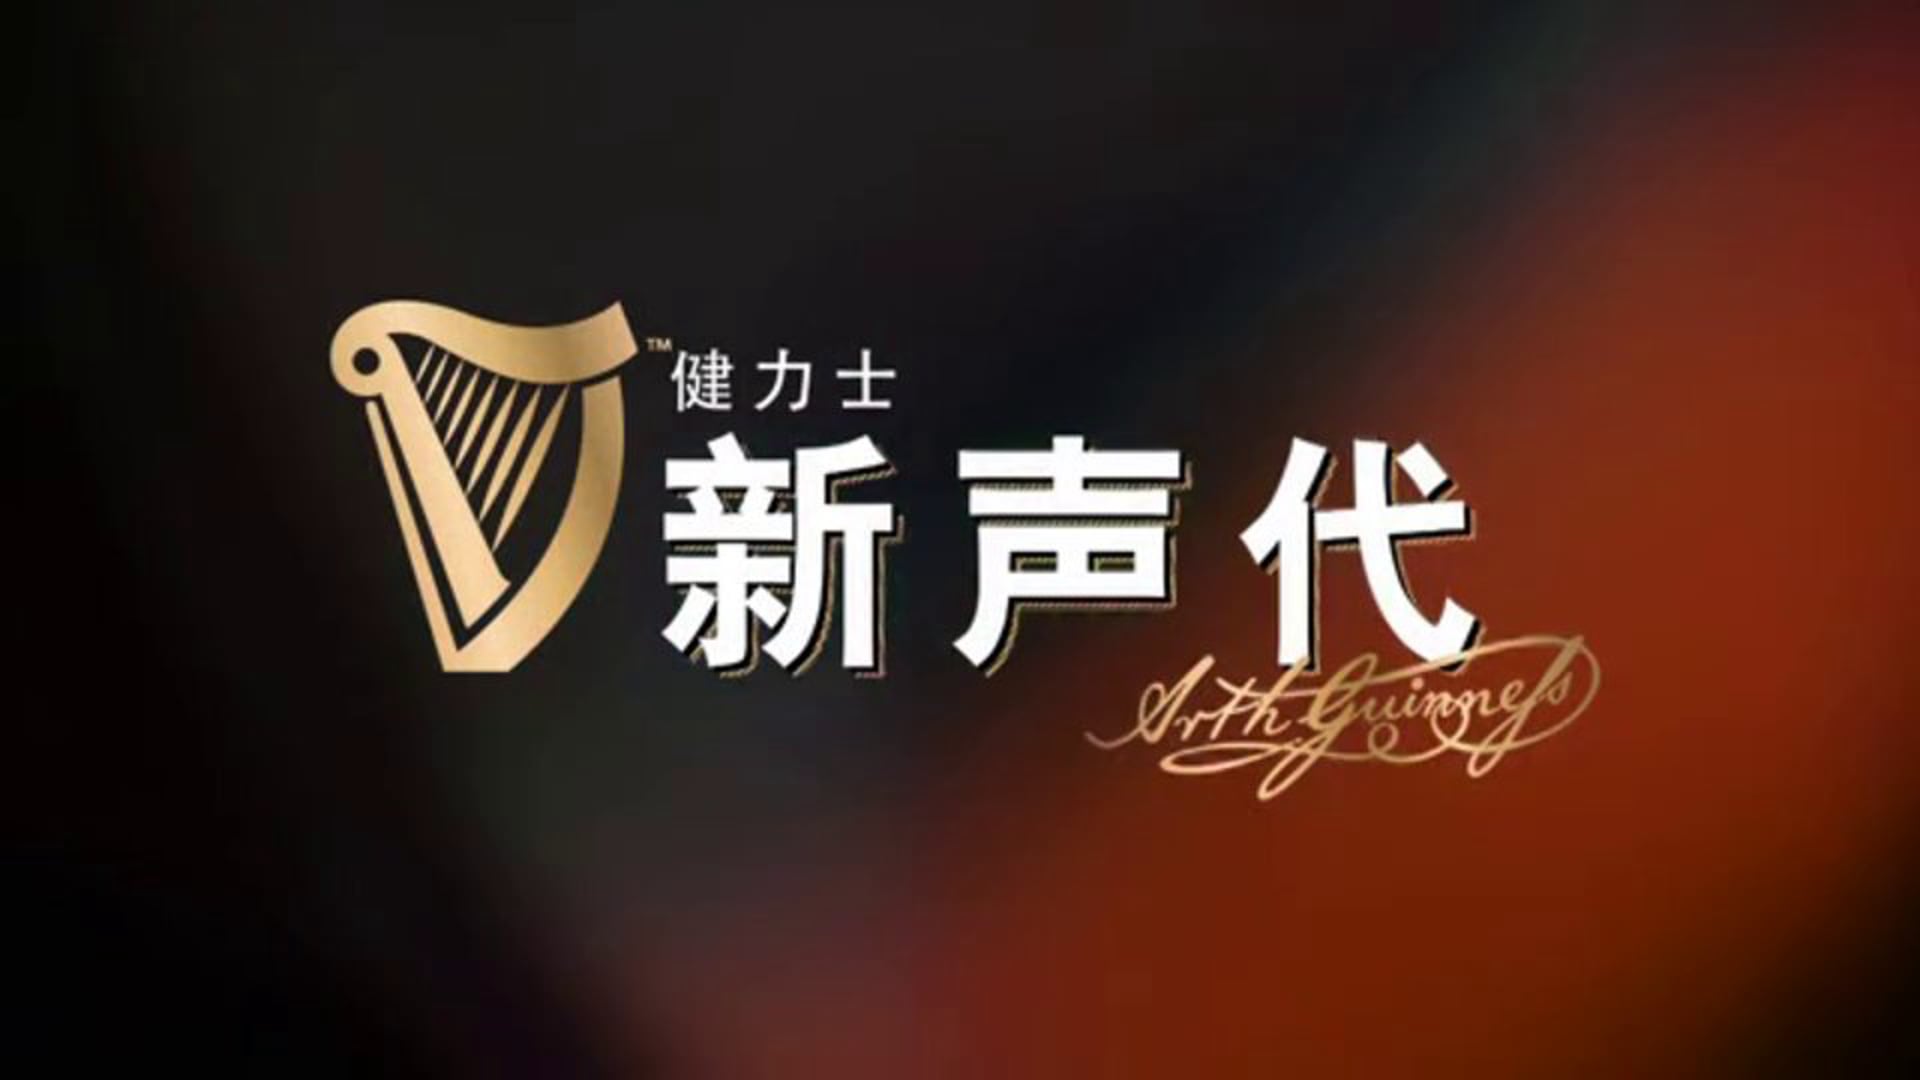 Guinness More Music presents Hao Yun